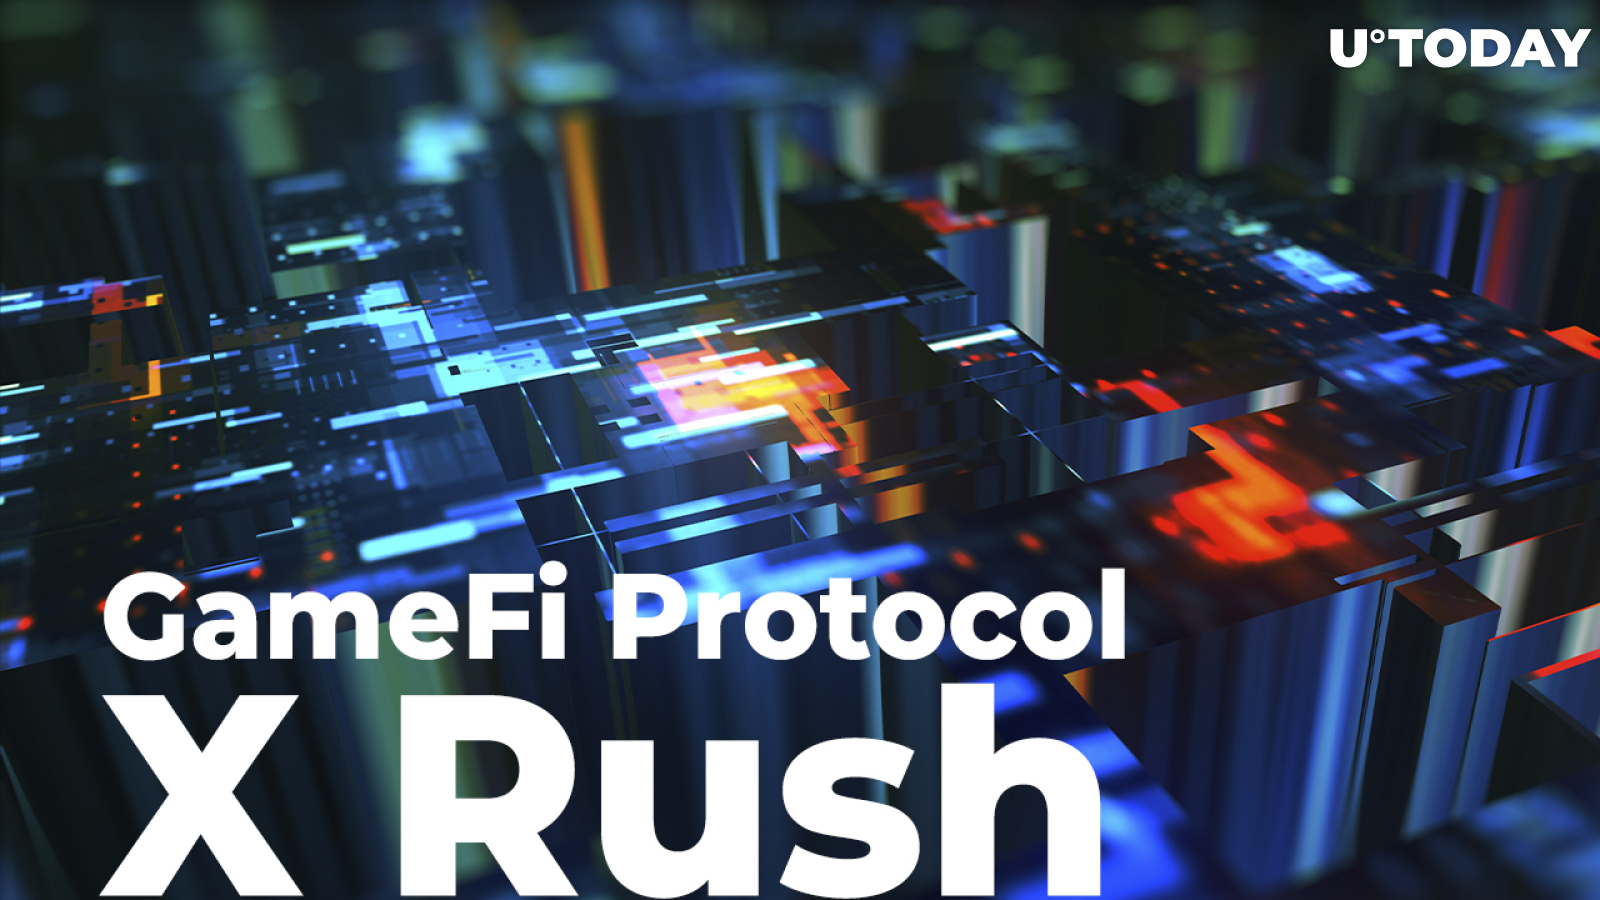 GameFi Protocol X Rush Concludes Seed Funding Led by KuCoin Ventures as CertiK Starts Auditing Its Contracts